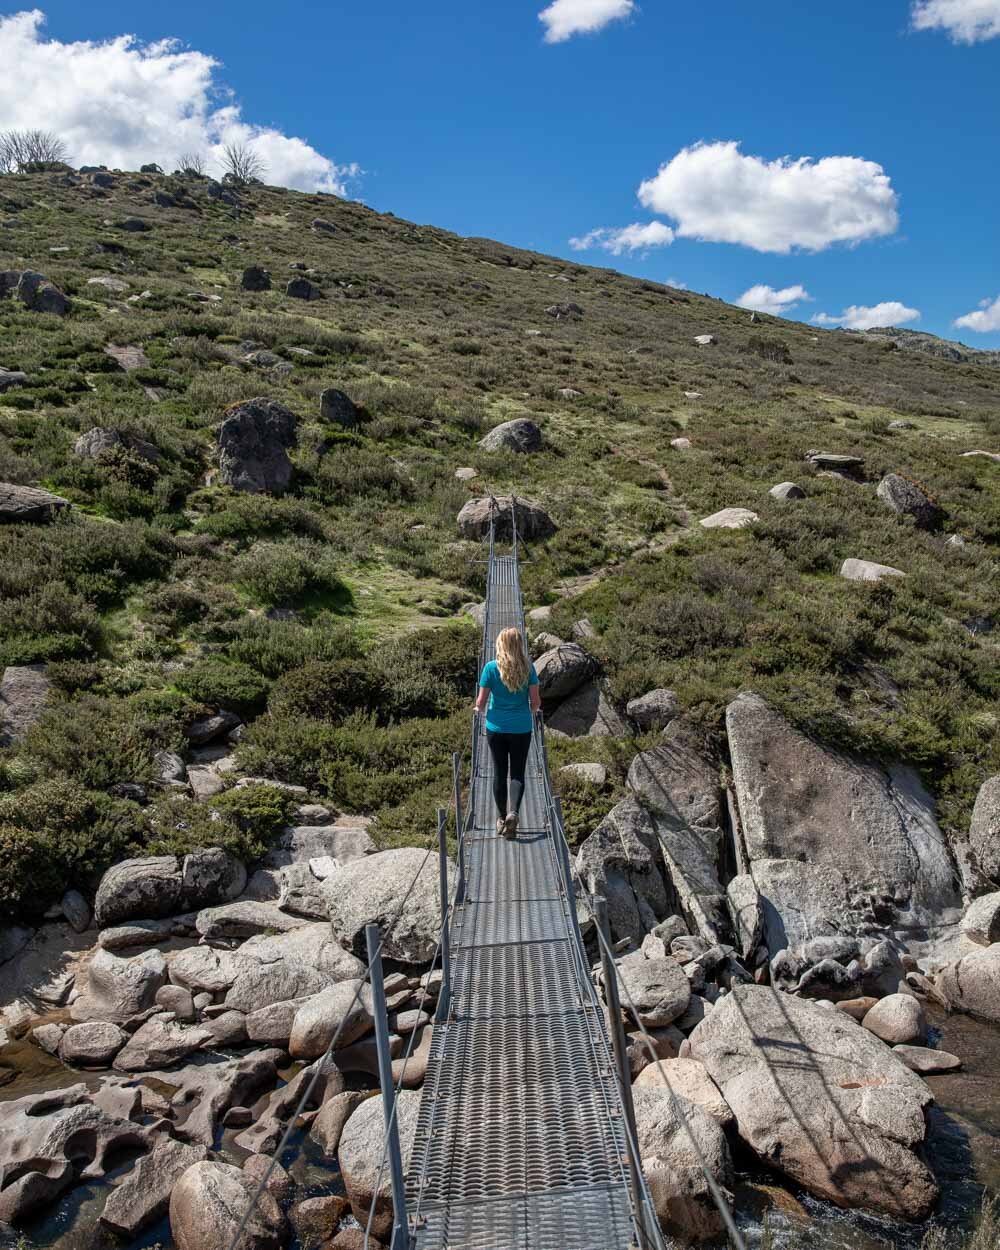 The suspension bridge in the Snowy Mountains